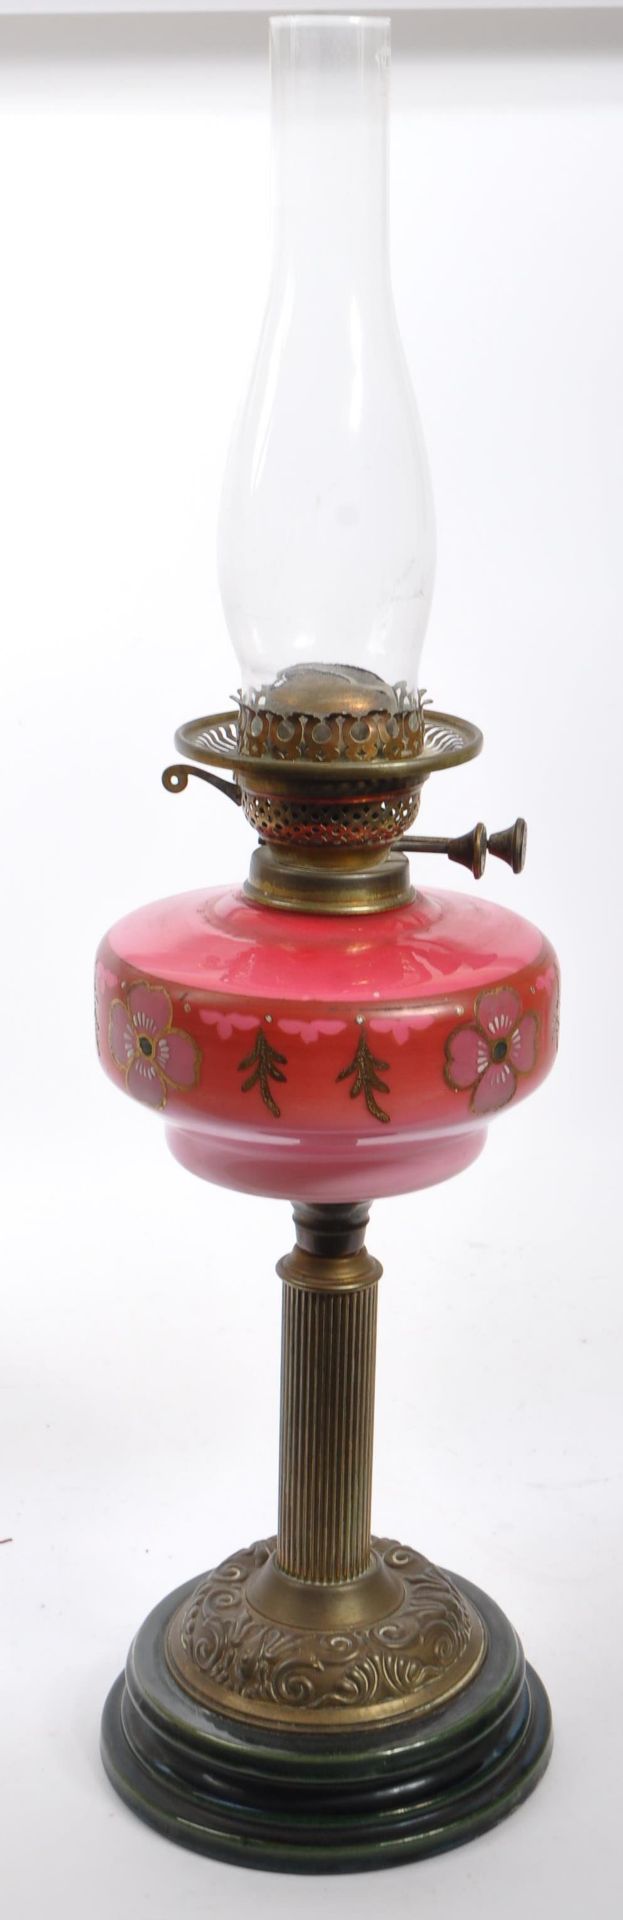 20TH CENTURY PINK OPALINE BRITISH MADE GLASS OIL LAMP BY DUPLEX - Image 2 of 5